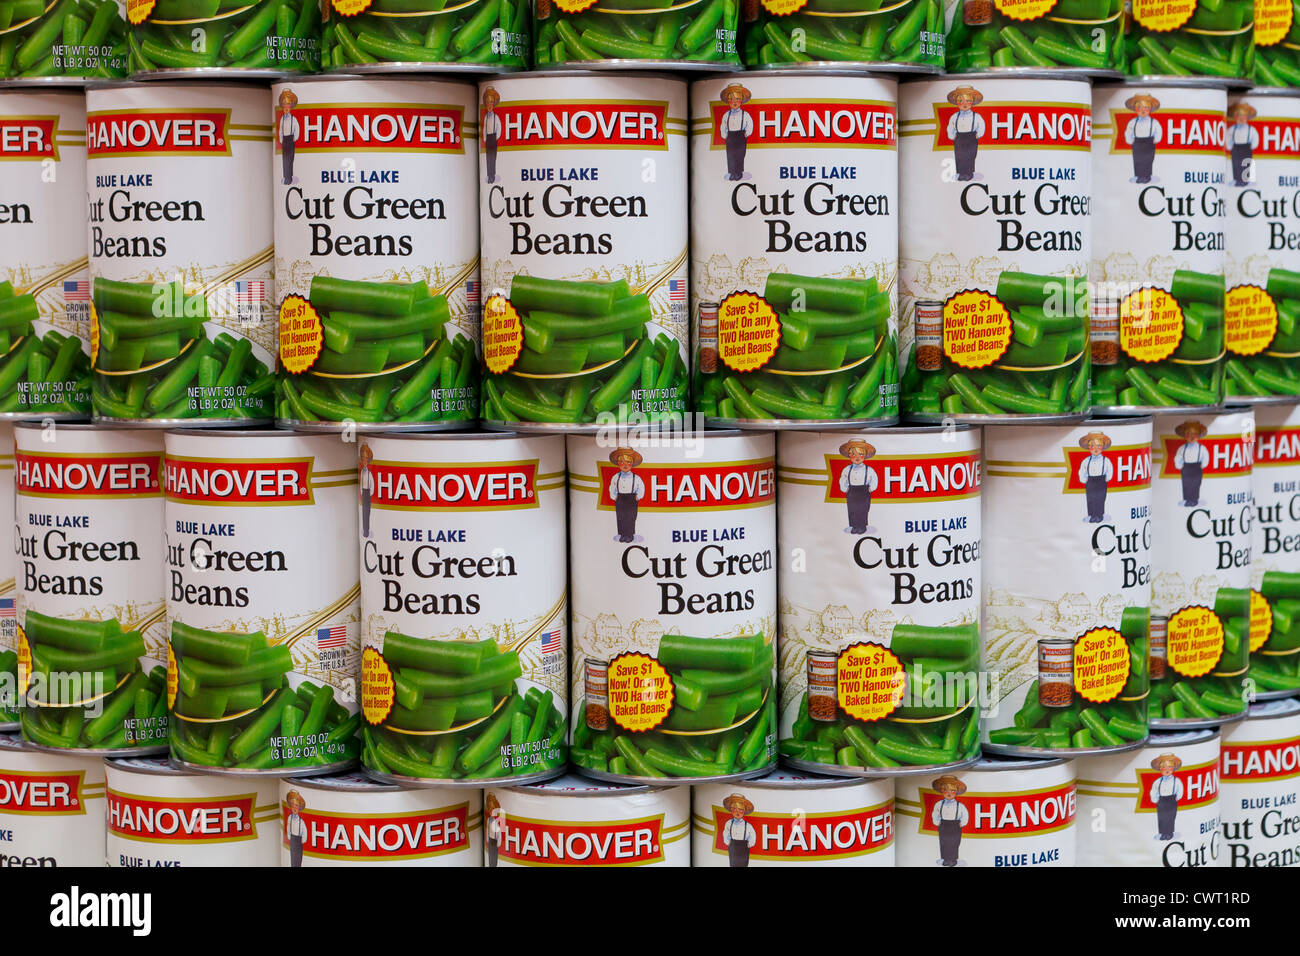 Canned Hanover Cut Green Beans Stock Photo